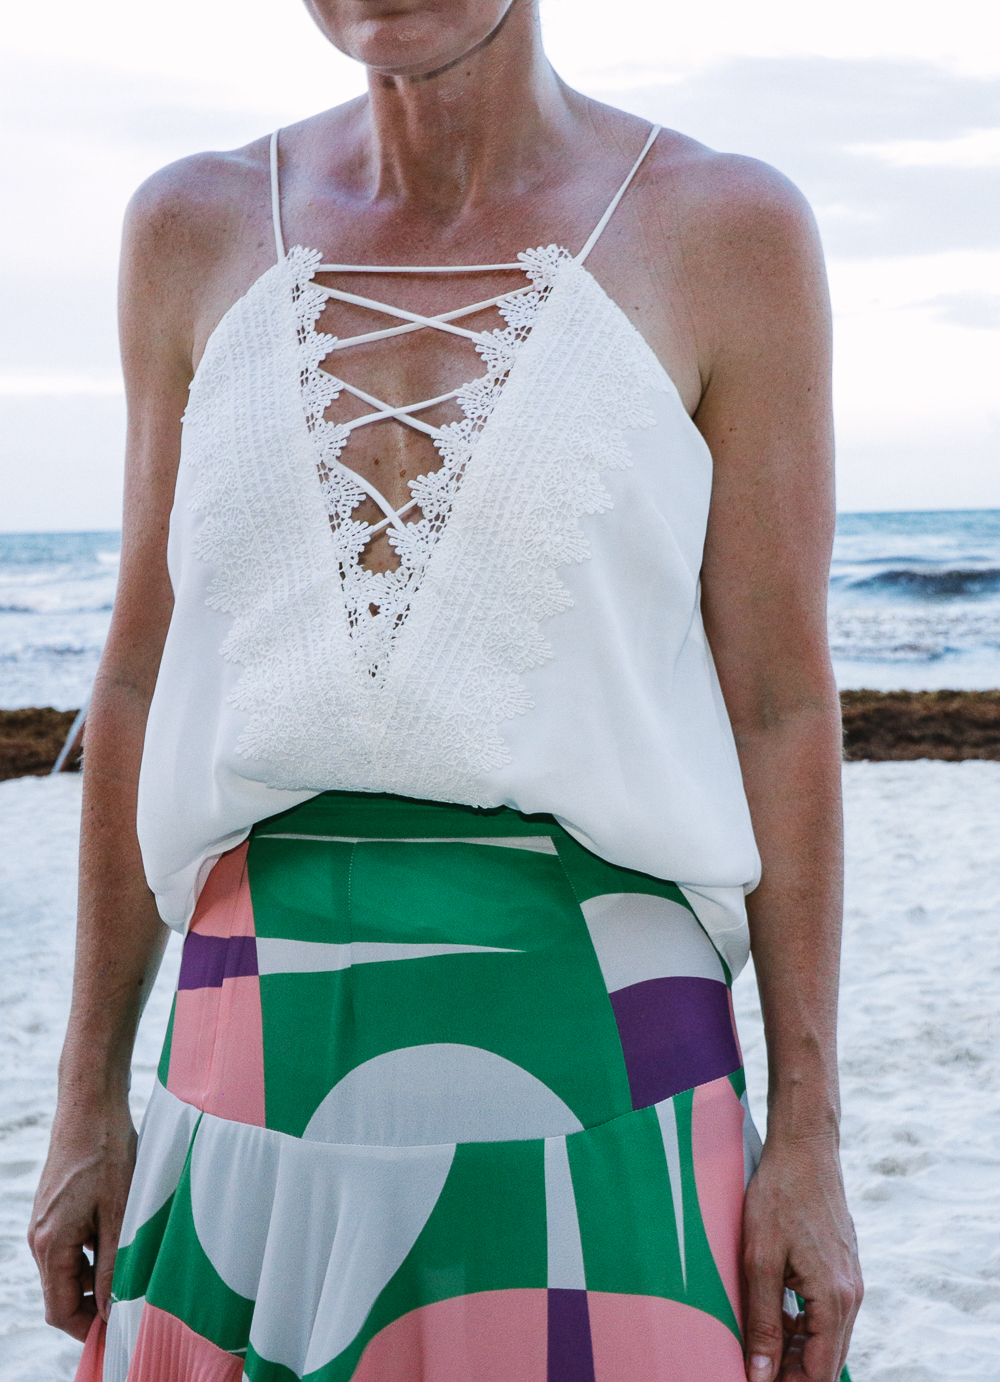 Maxi Skirts, my picks including this gorgeous pleated pink and green maxi skirt by Alexis paired with a WAYF lace up cami in white on the beach in Tulum, Mexico